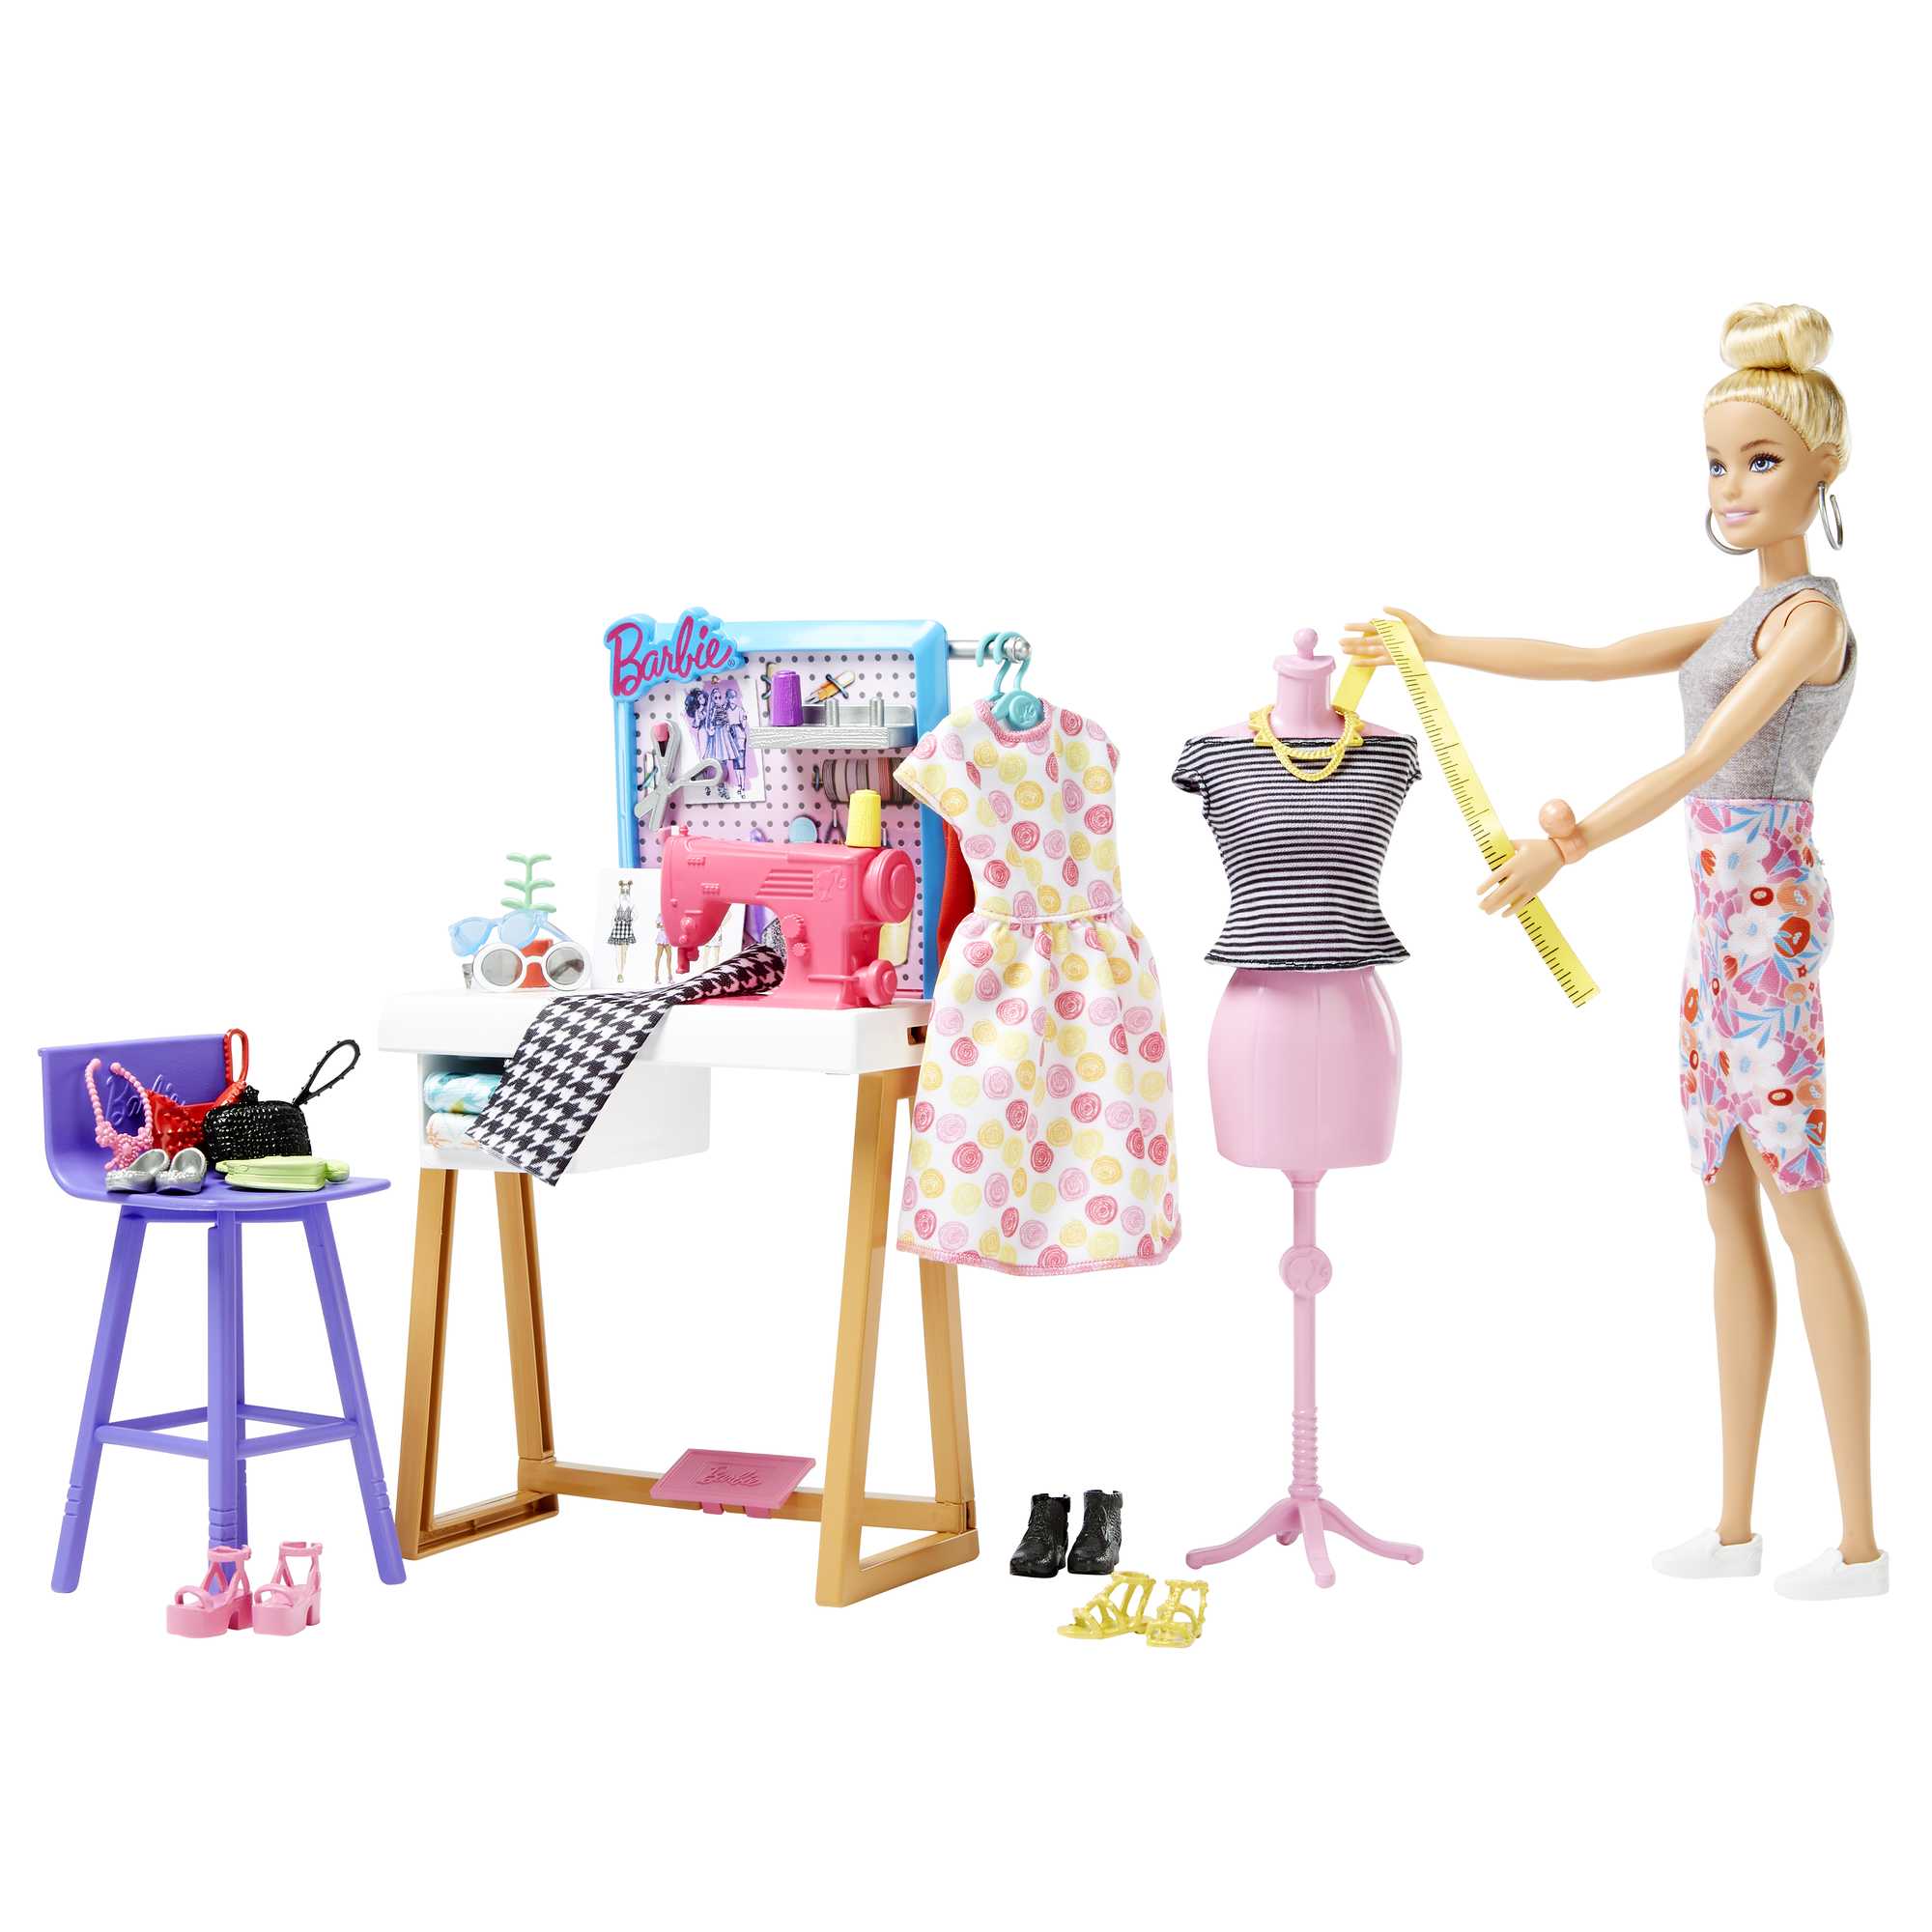 Barbie Chelsea Can Be Playset with Brunette Chelsea Fashion Designer Doll  (6 inches), Mannequin, Sewing Machine, Tape Measure, Scissors, Fabric,  Great